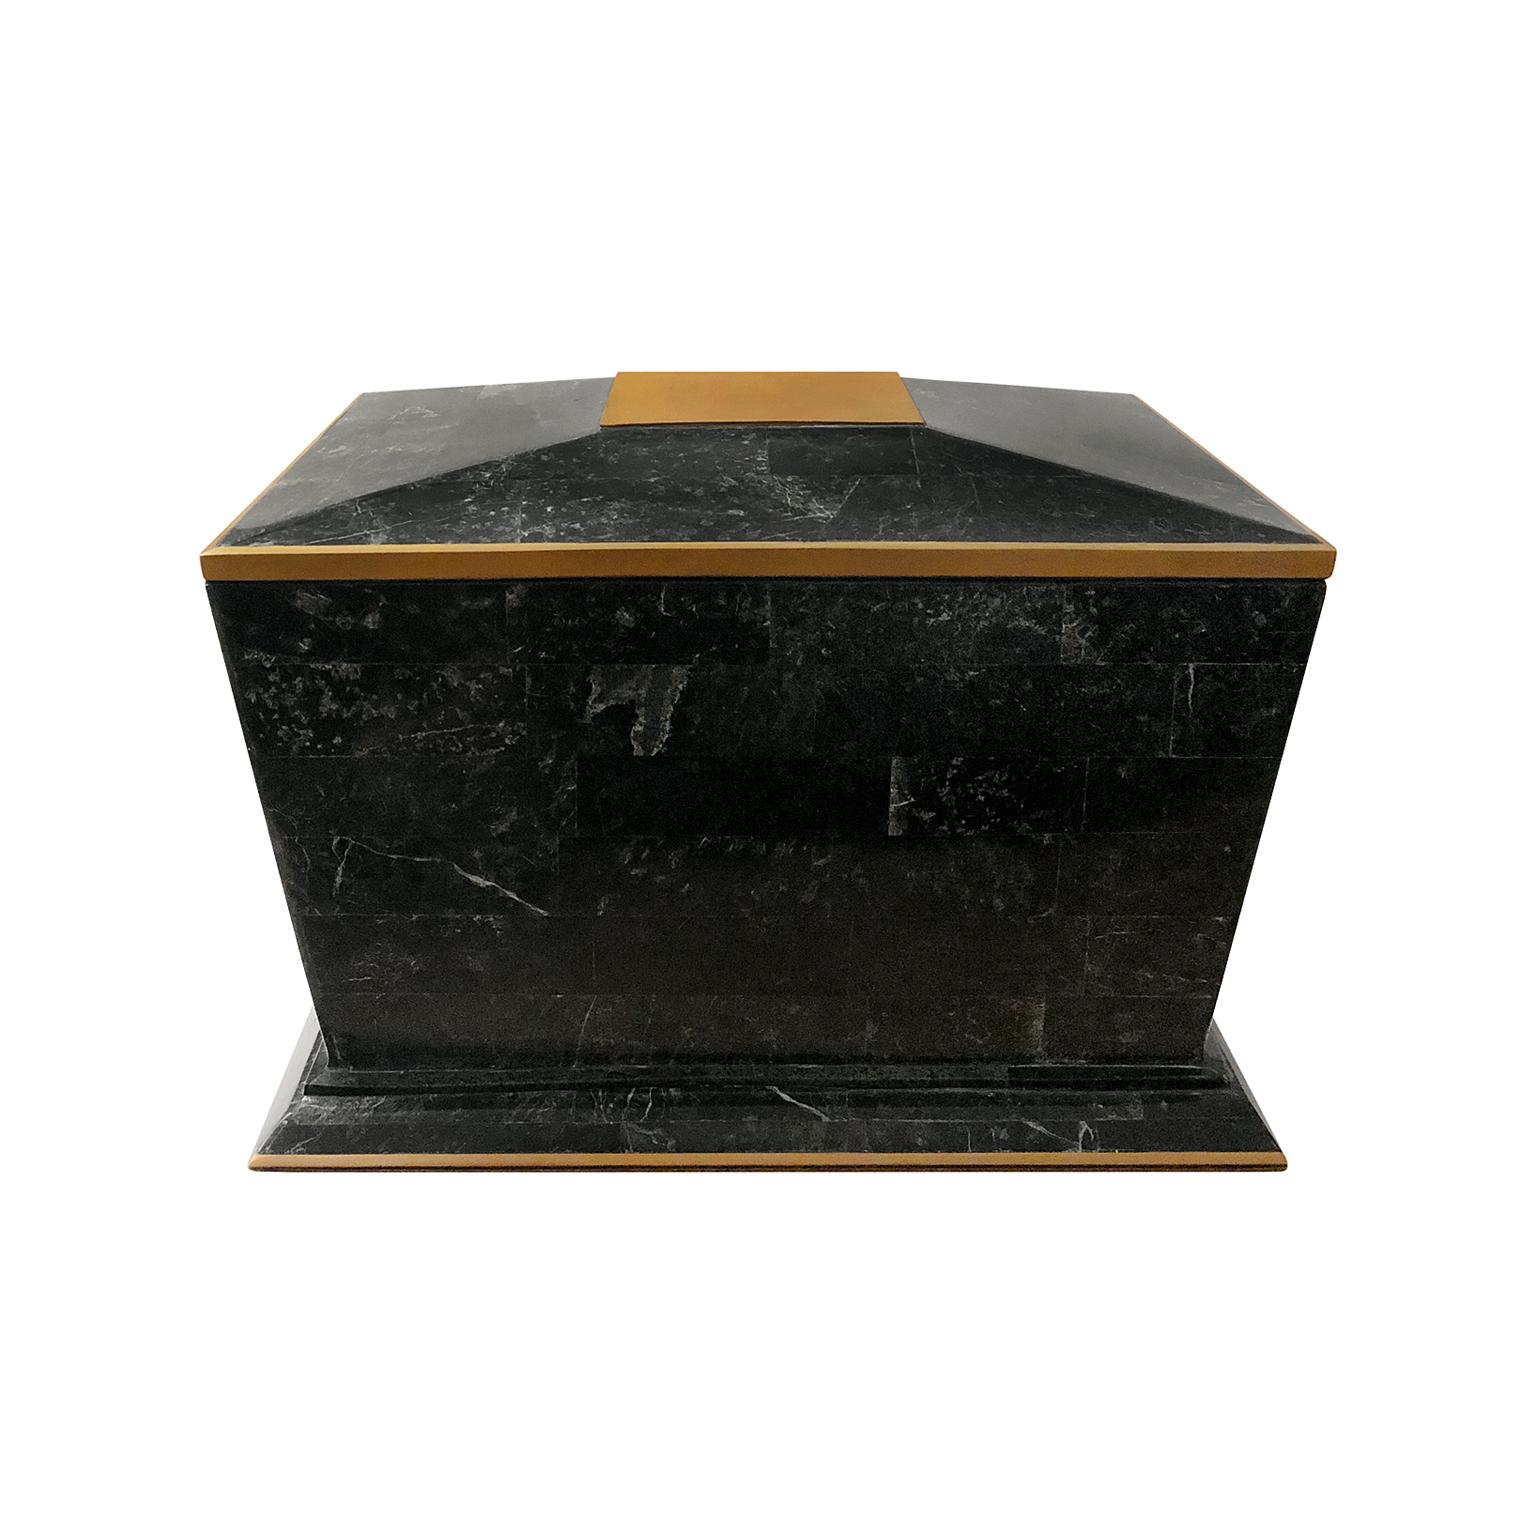 Maitland Smith black tessellated stone box with flares base and brass trim. USA, 1970s.